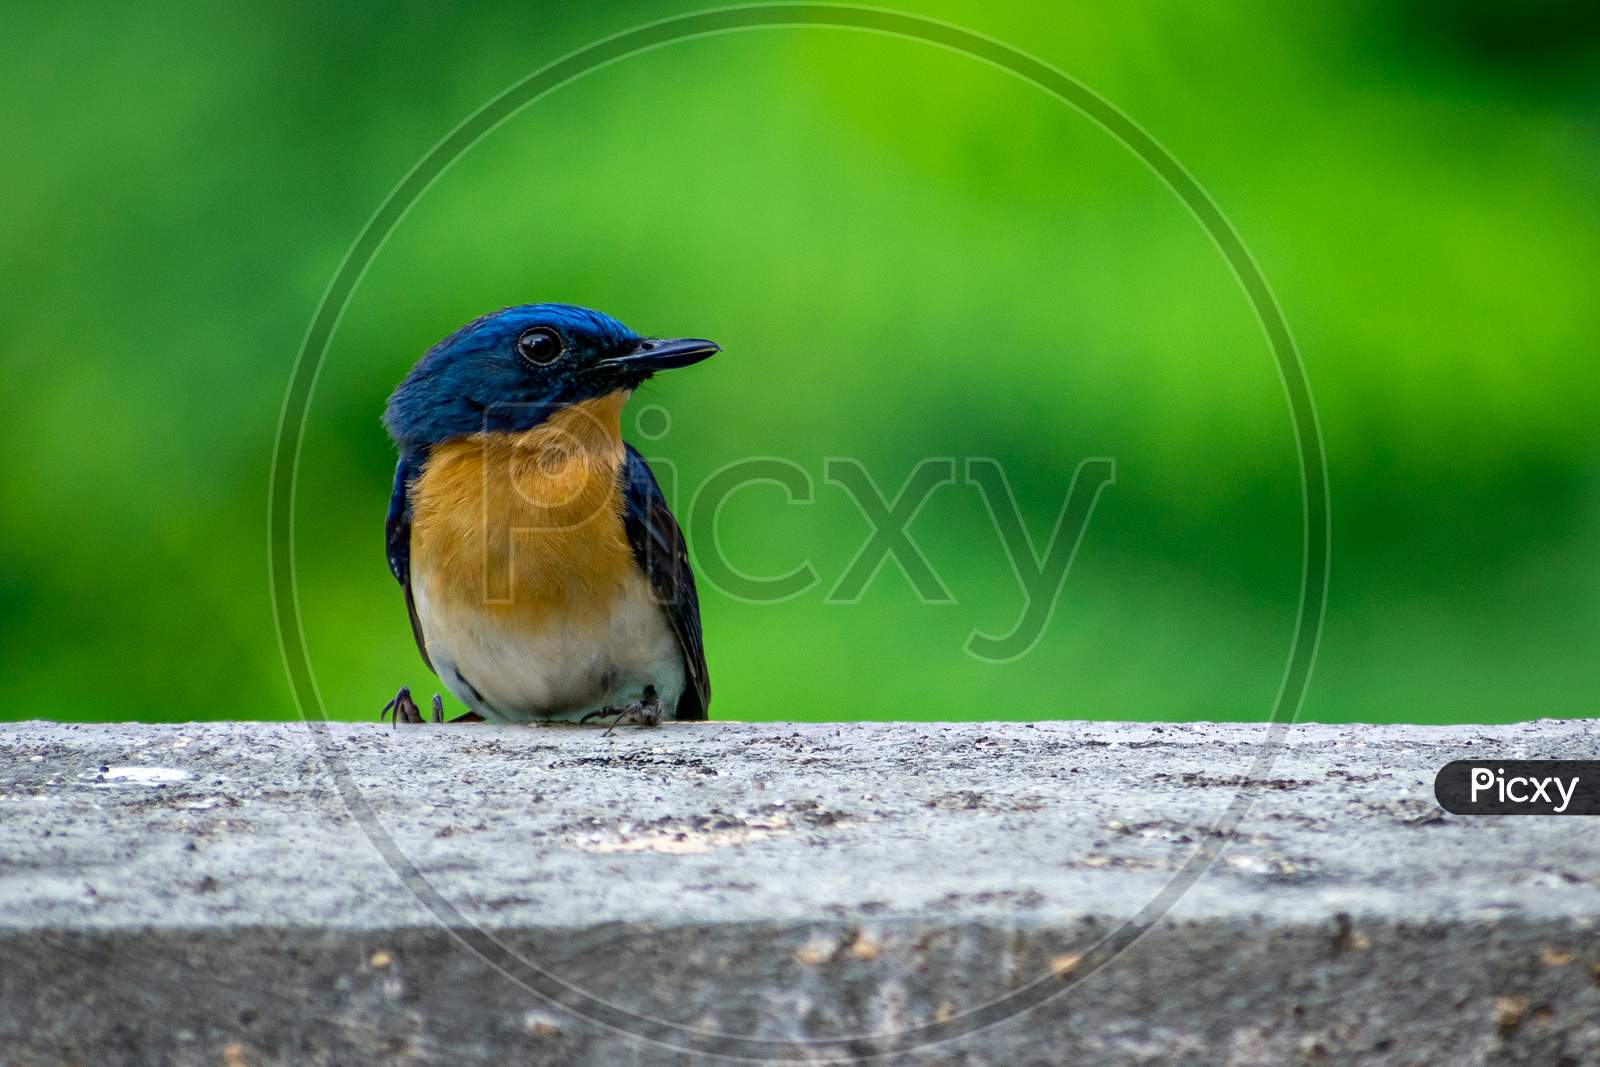 Colorful, Isolated, Young Indian Blue Robin Sitting On A Wall Of The Building.